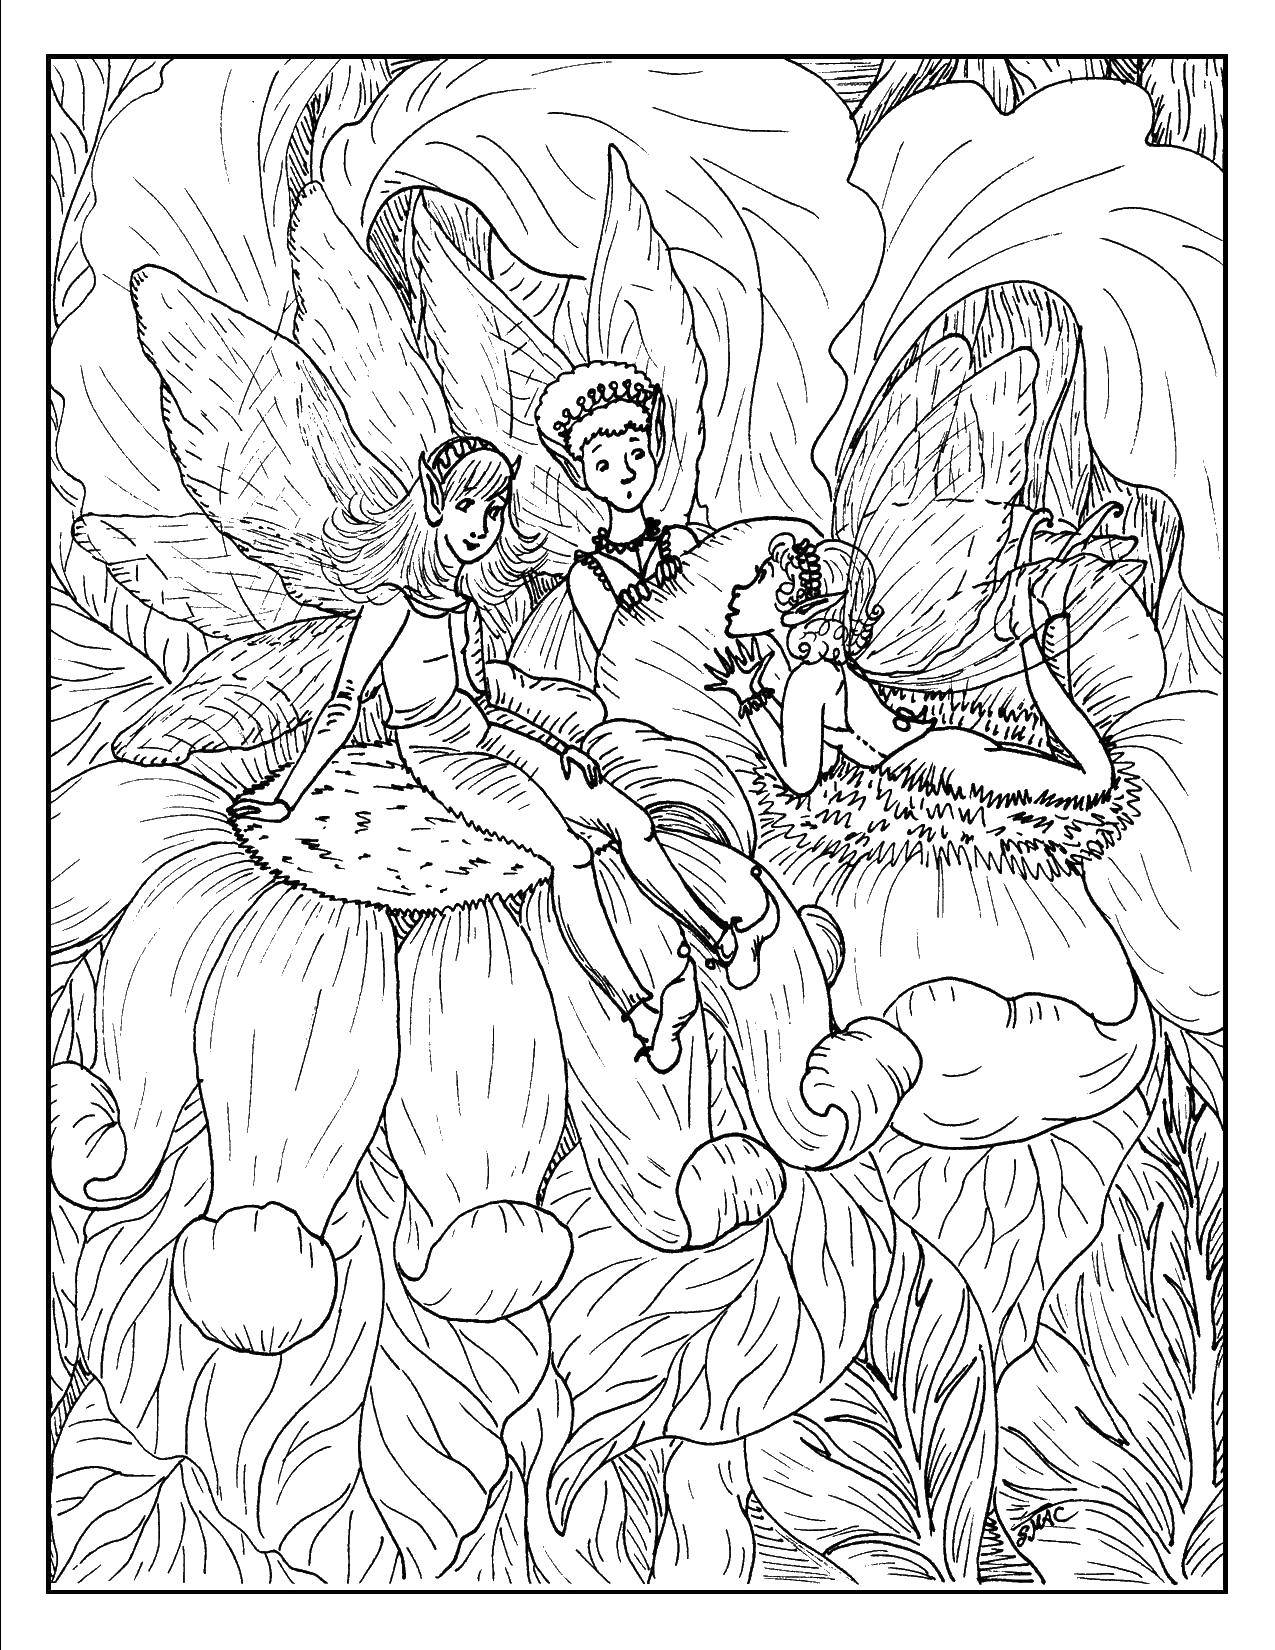 Coloring Three fairies on the flower. Category flowers. Tags:  flowers, fairies.